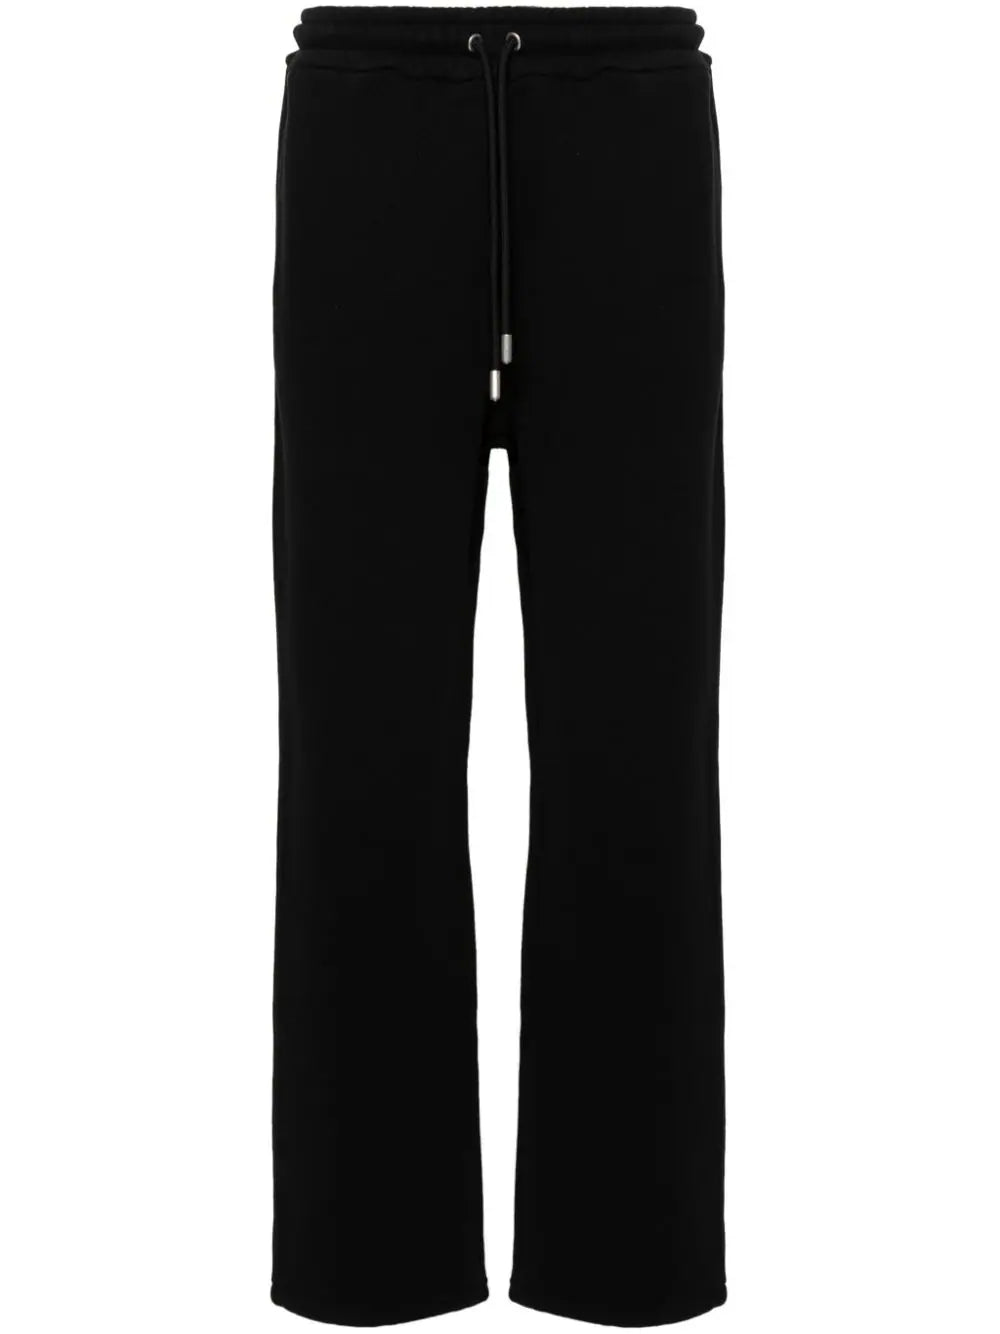 Scribble-Diag-stripes jersey trousers